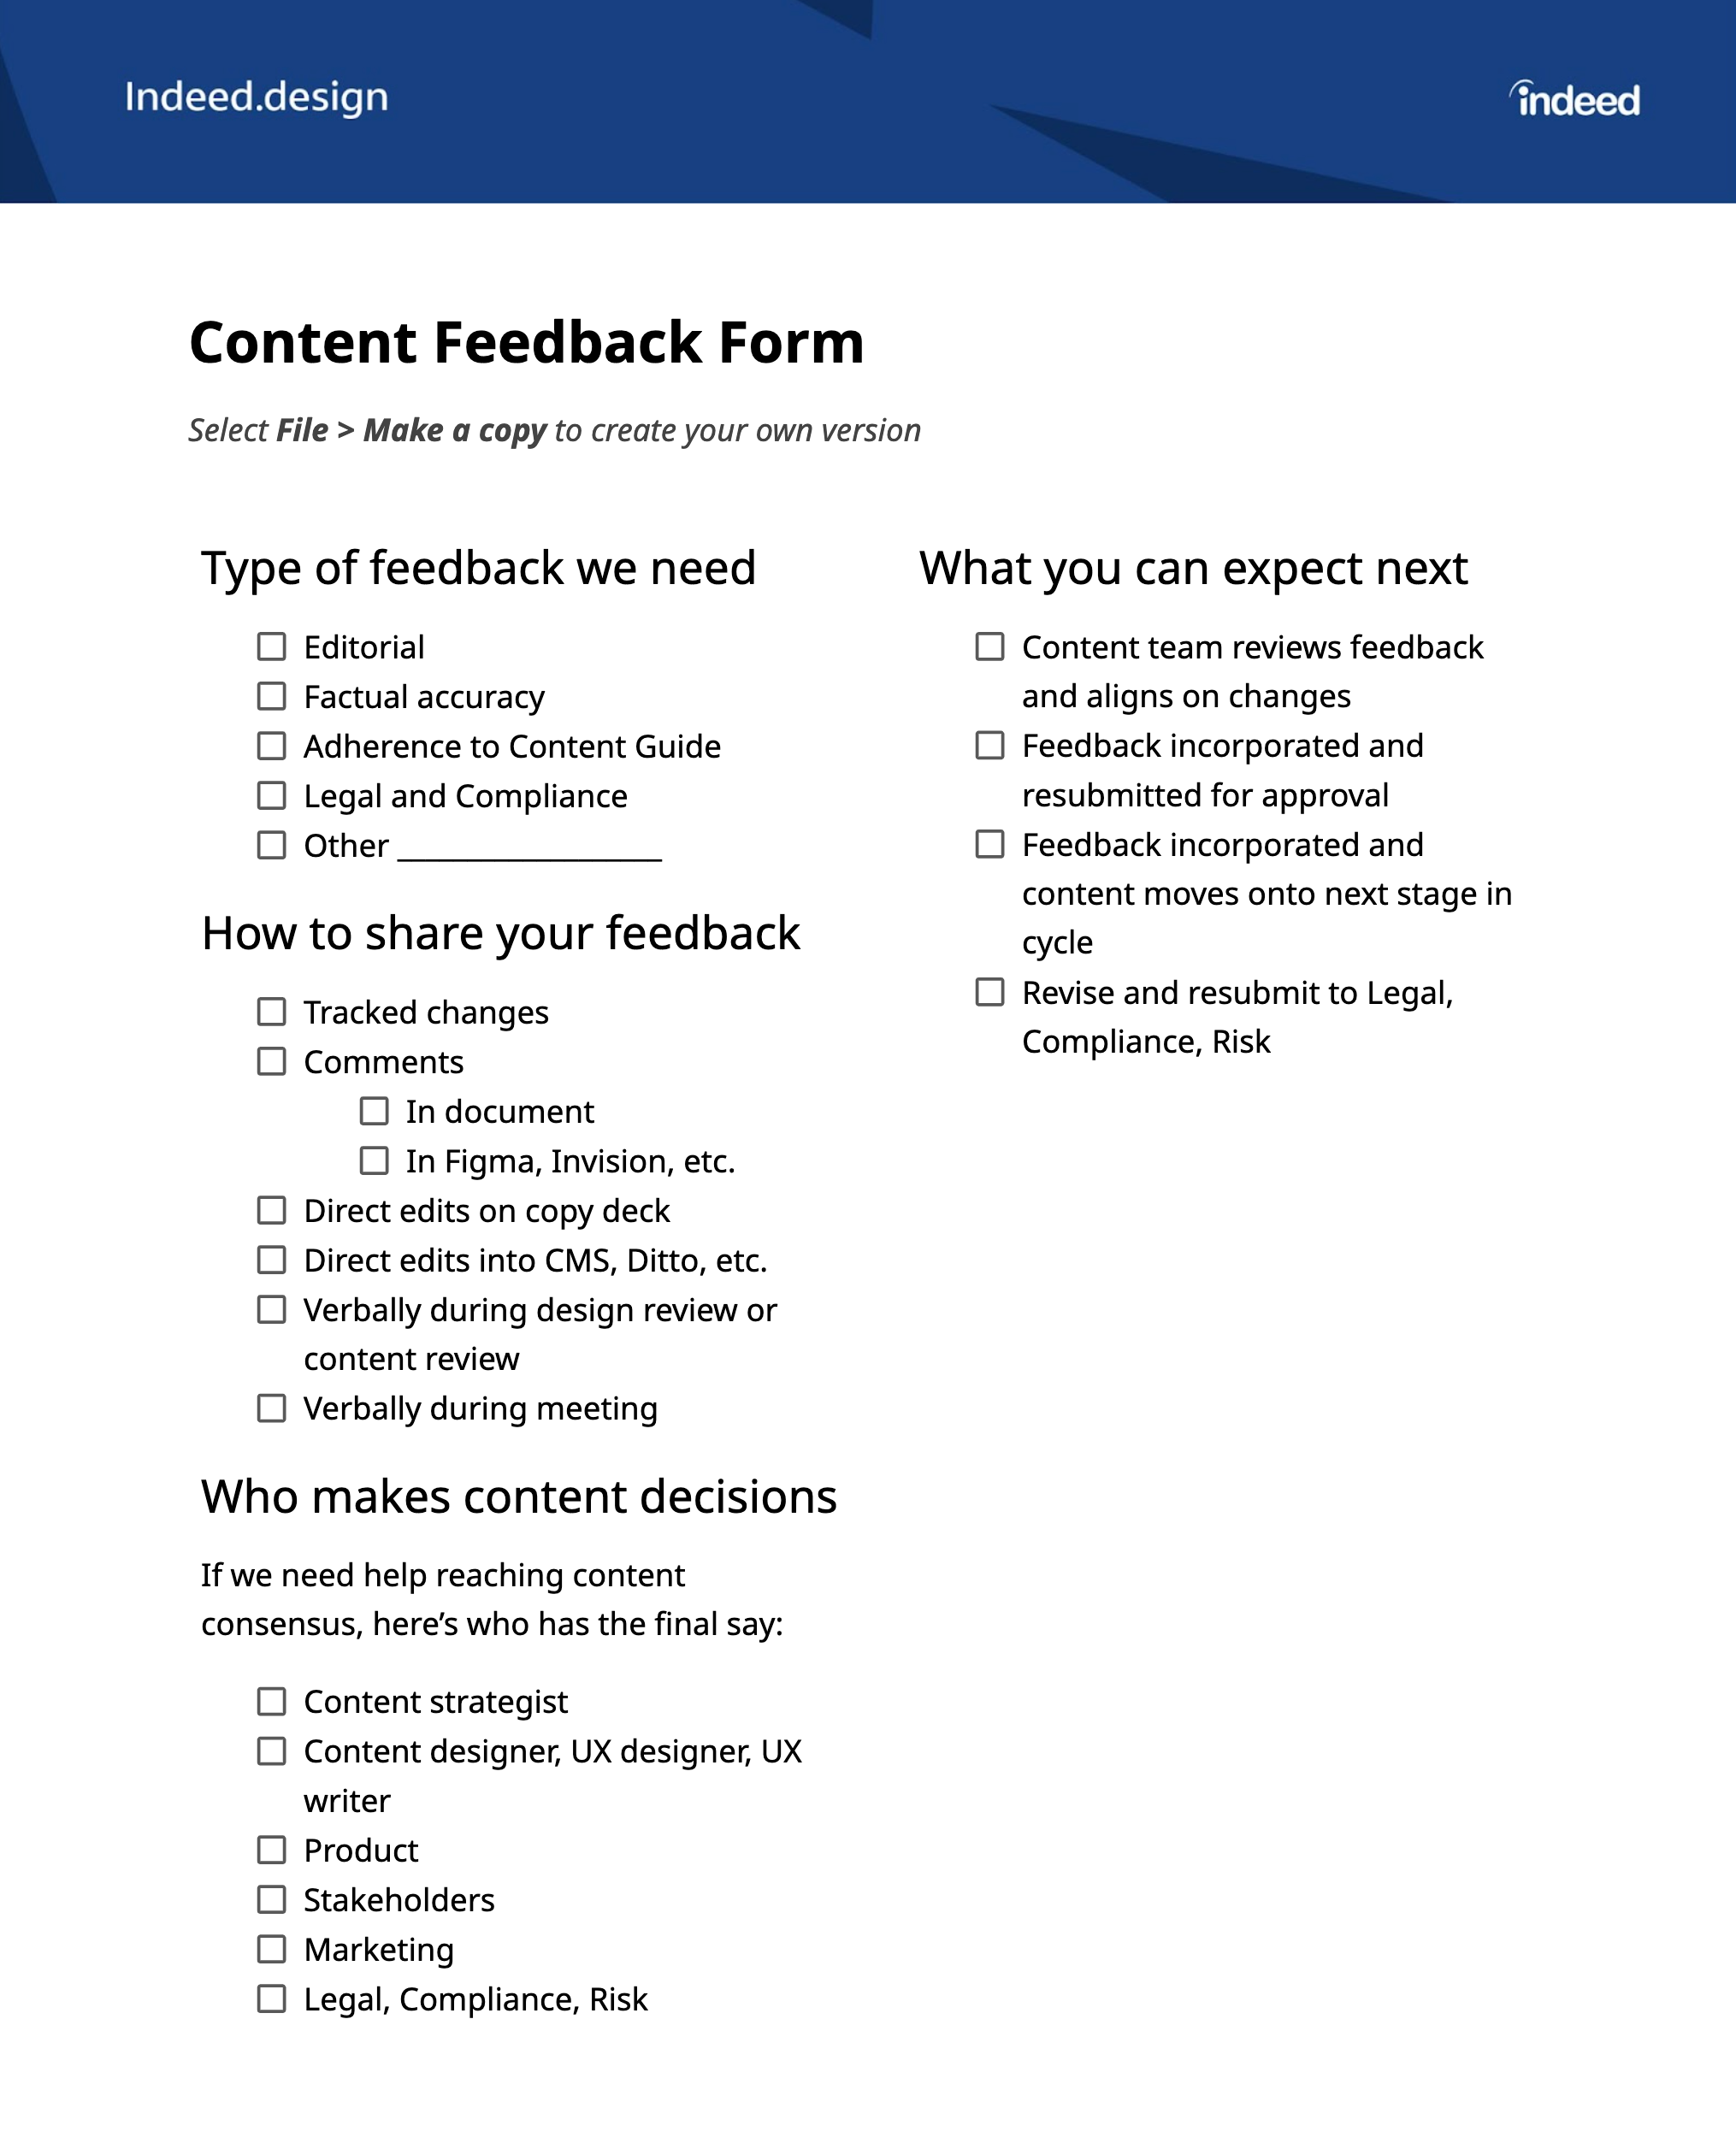 An example content feedback form groups checklist items by topic to focus reviewers' attention.